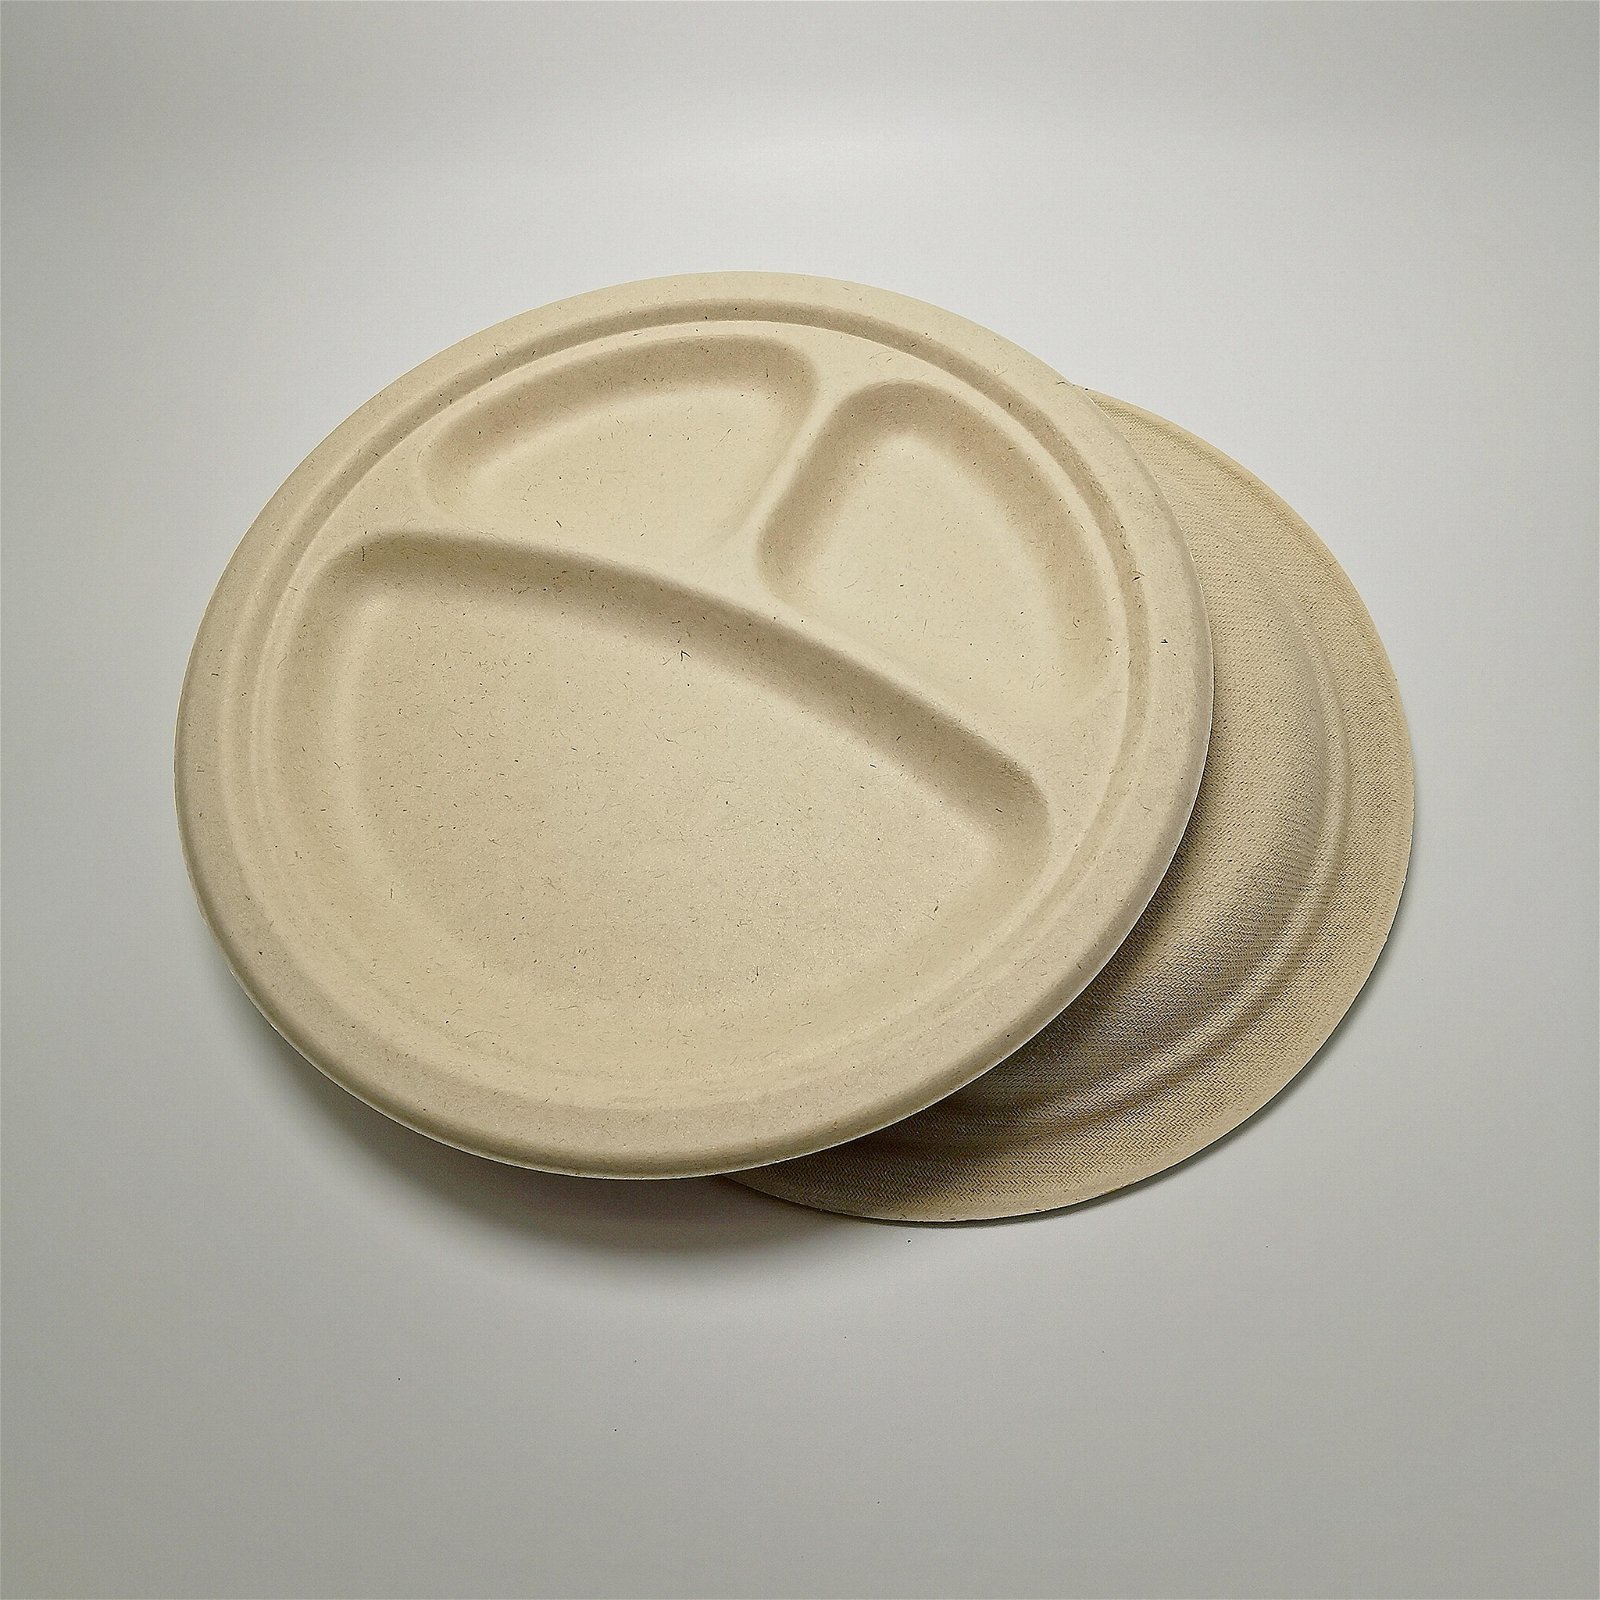 9 inch 3 compartment round Wheat straw Plate 100% biodegradable Plates 5